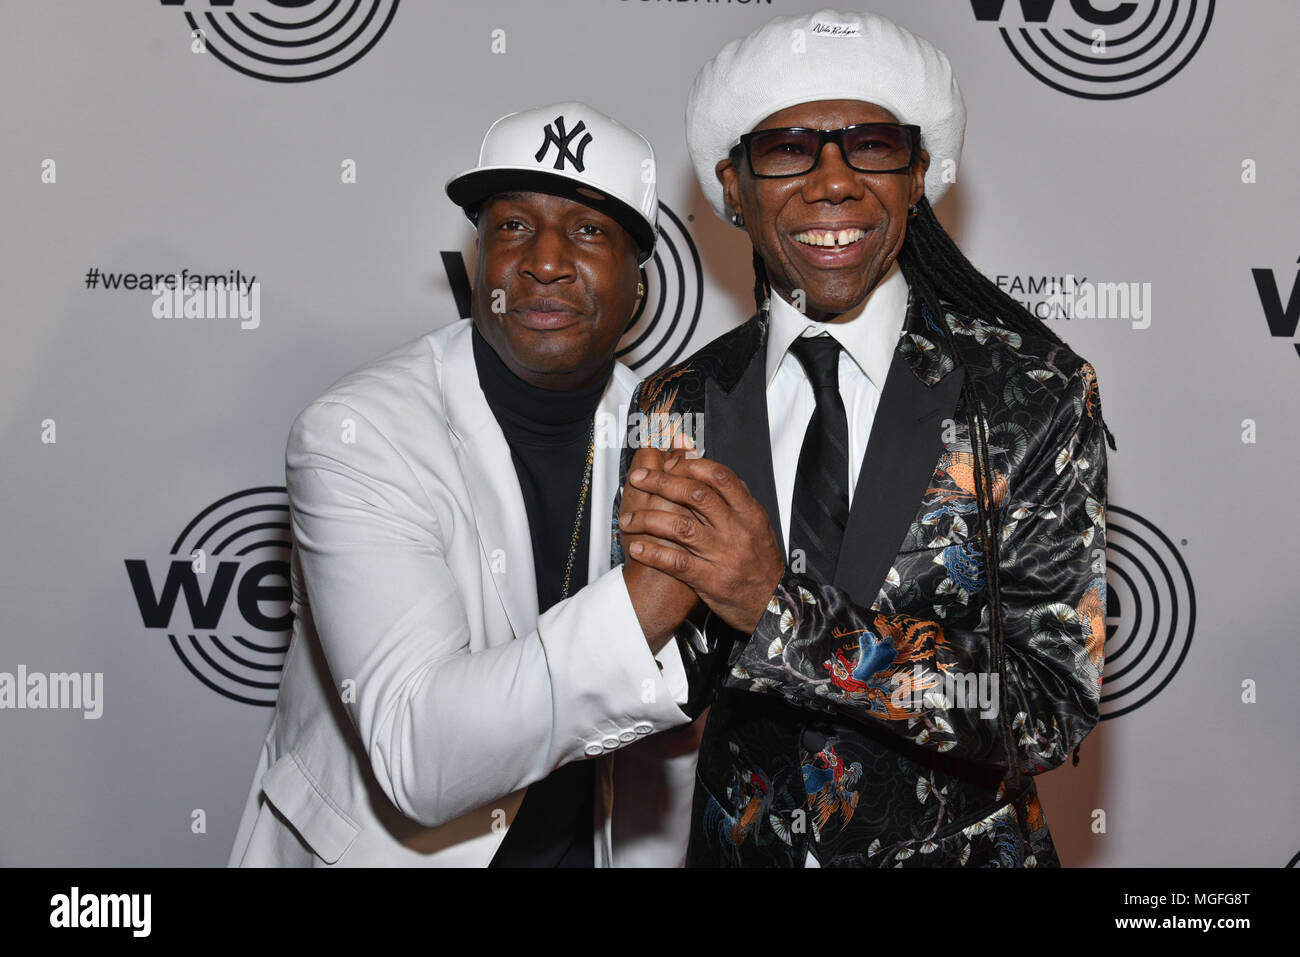 Grandmaster Flash and Nile Rodgers attend the We Are Family Foundation 2018 Gala at Hammerstein Ballroom on April 27, 2018 in New York City. Credit: Erik Pendzich/Alamy Live News Stock Photo